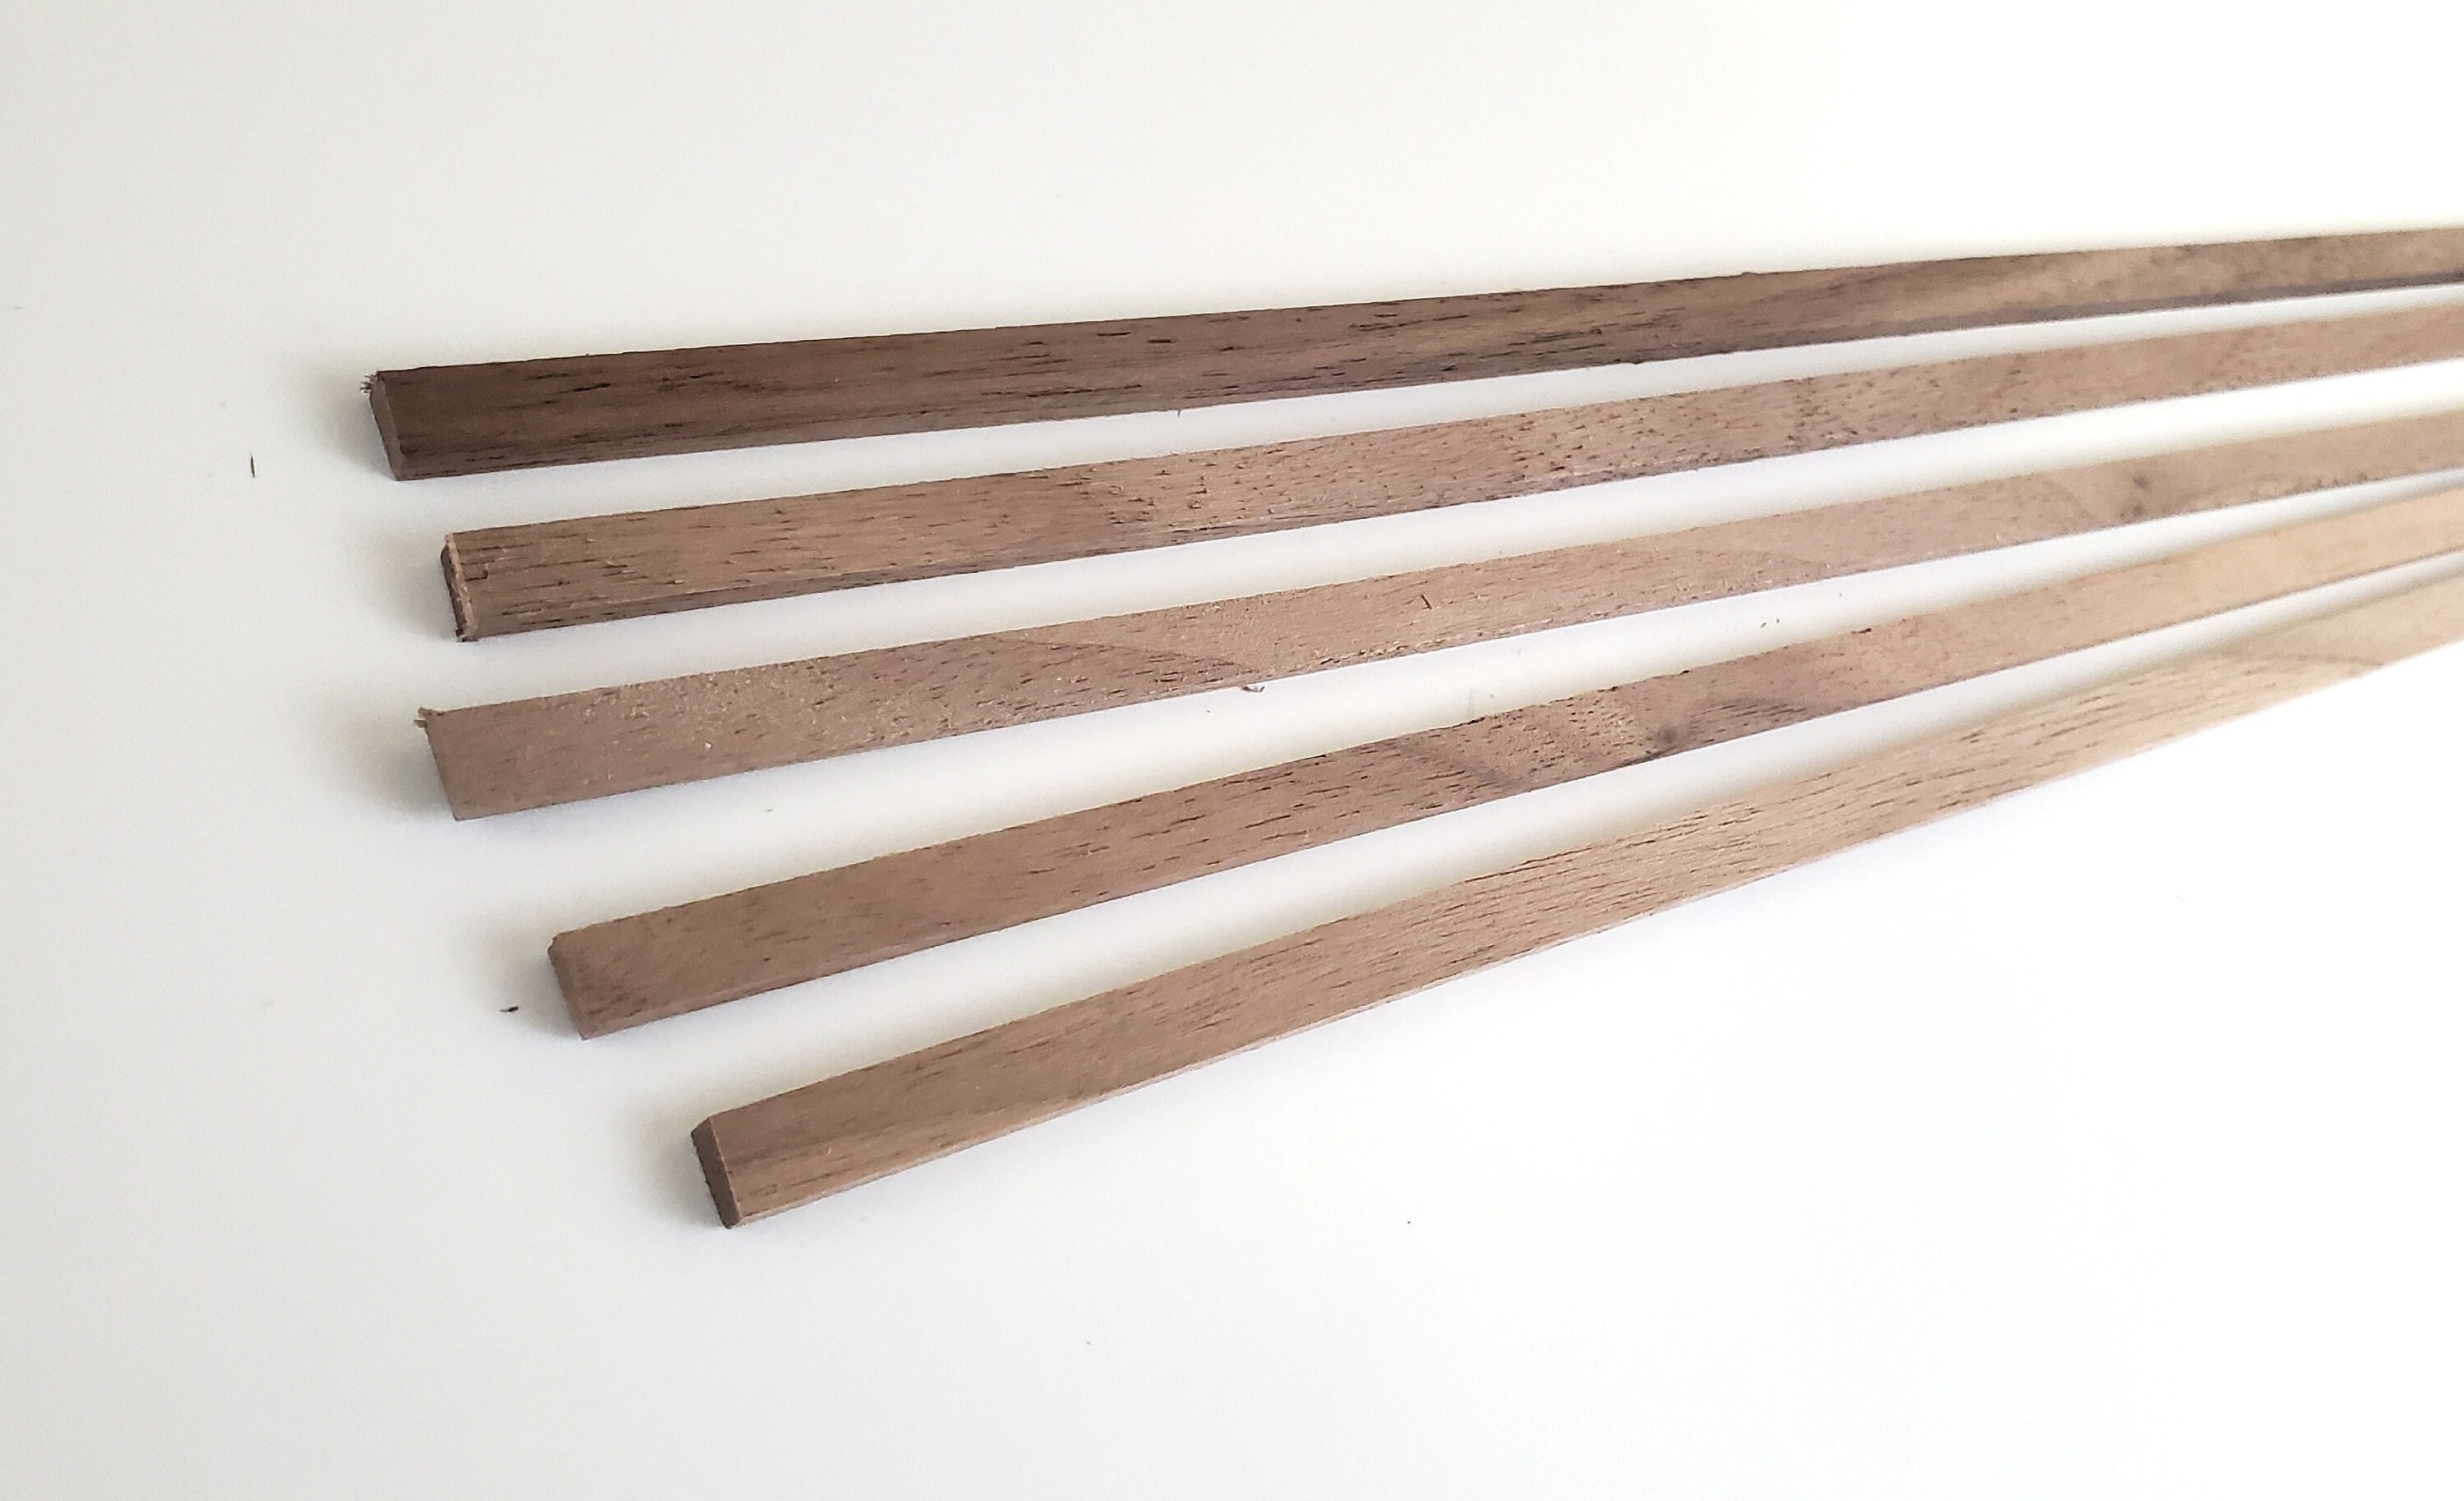 Black Walnut Wood Strips 7 * 7 * 500mm Thick One Set Contains 30 Wood Strips